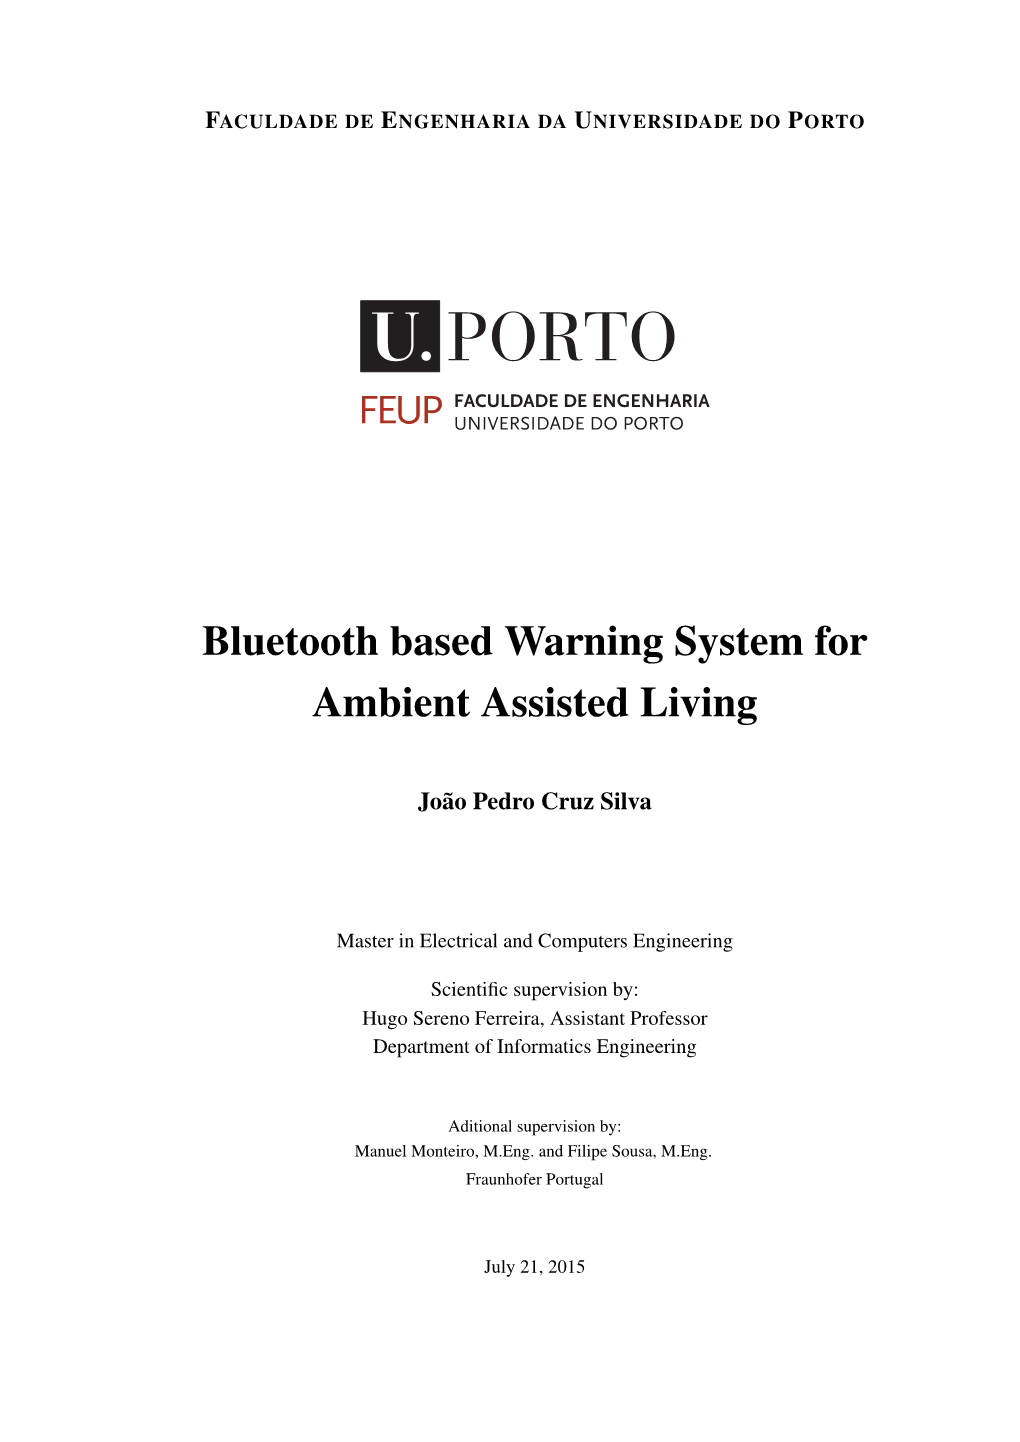 Bluetooth Based Warning System for Ambient Assisted Living